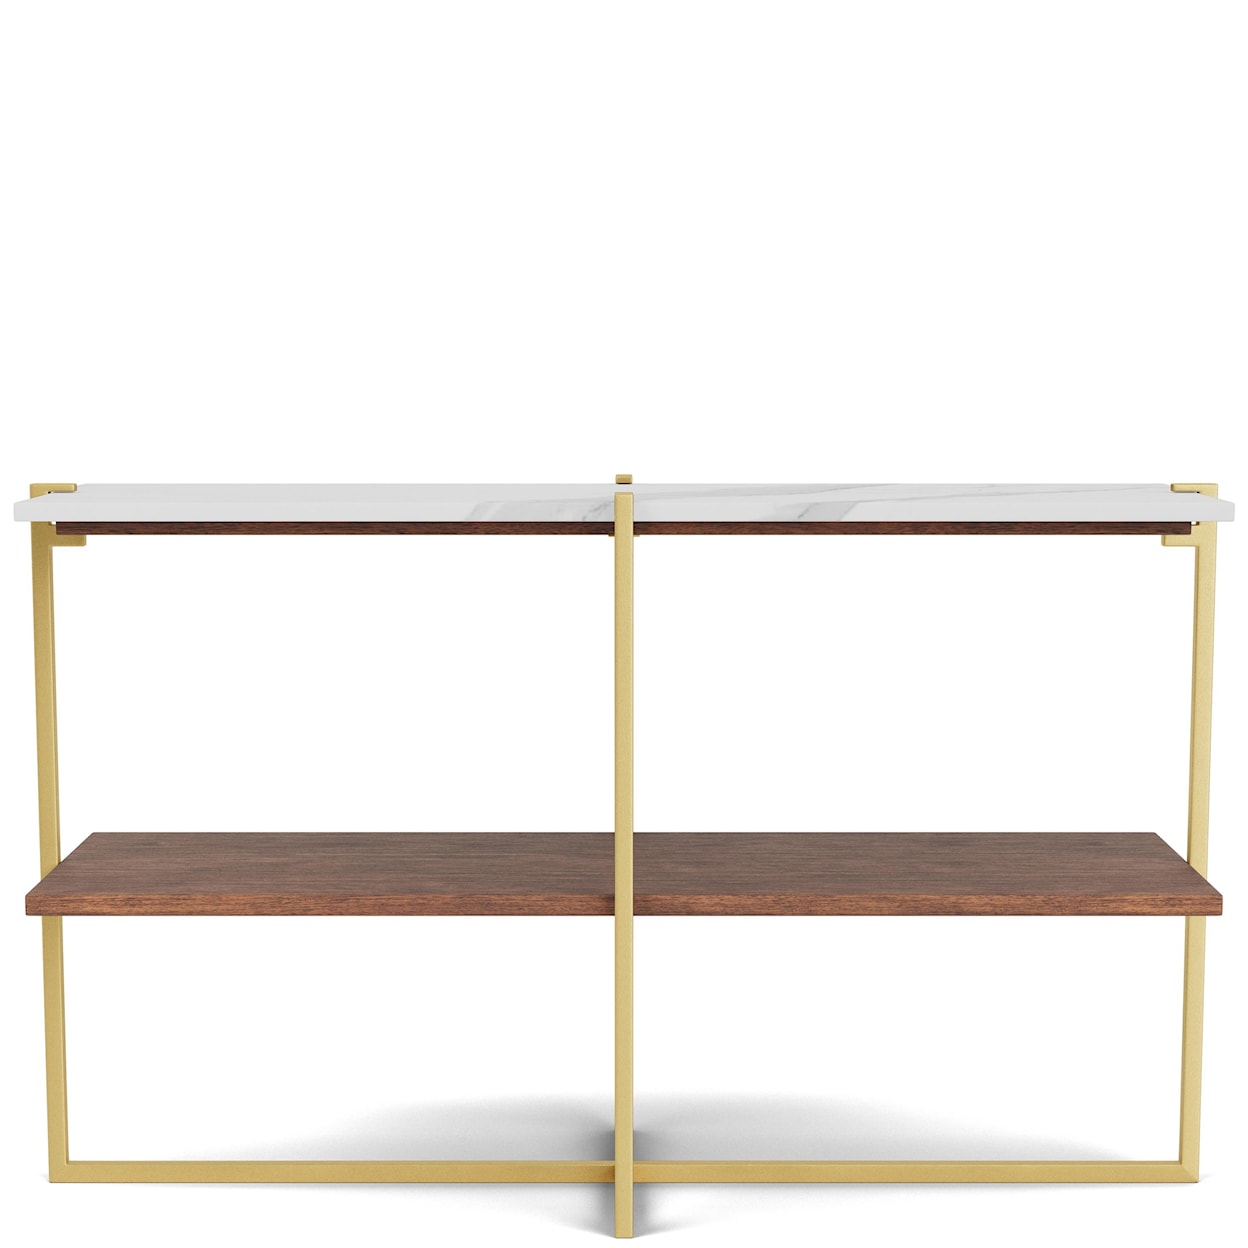 Riverside Furniture Everly Console Table